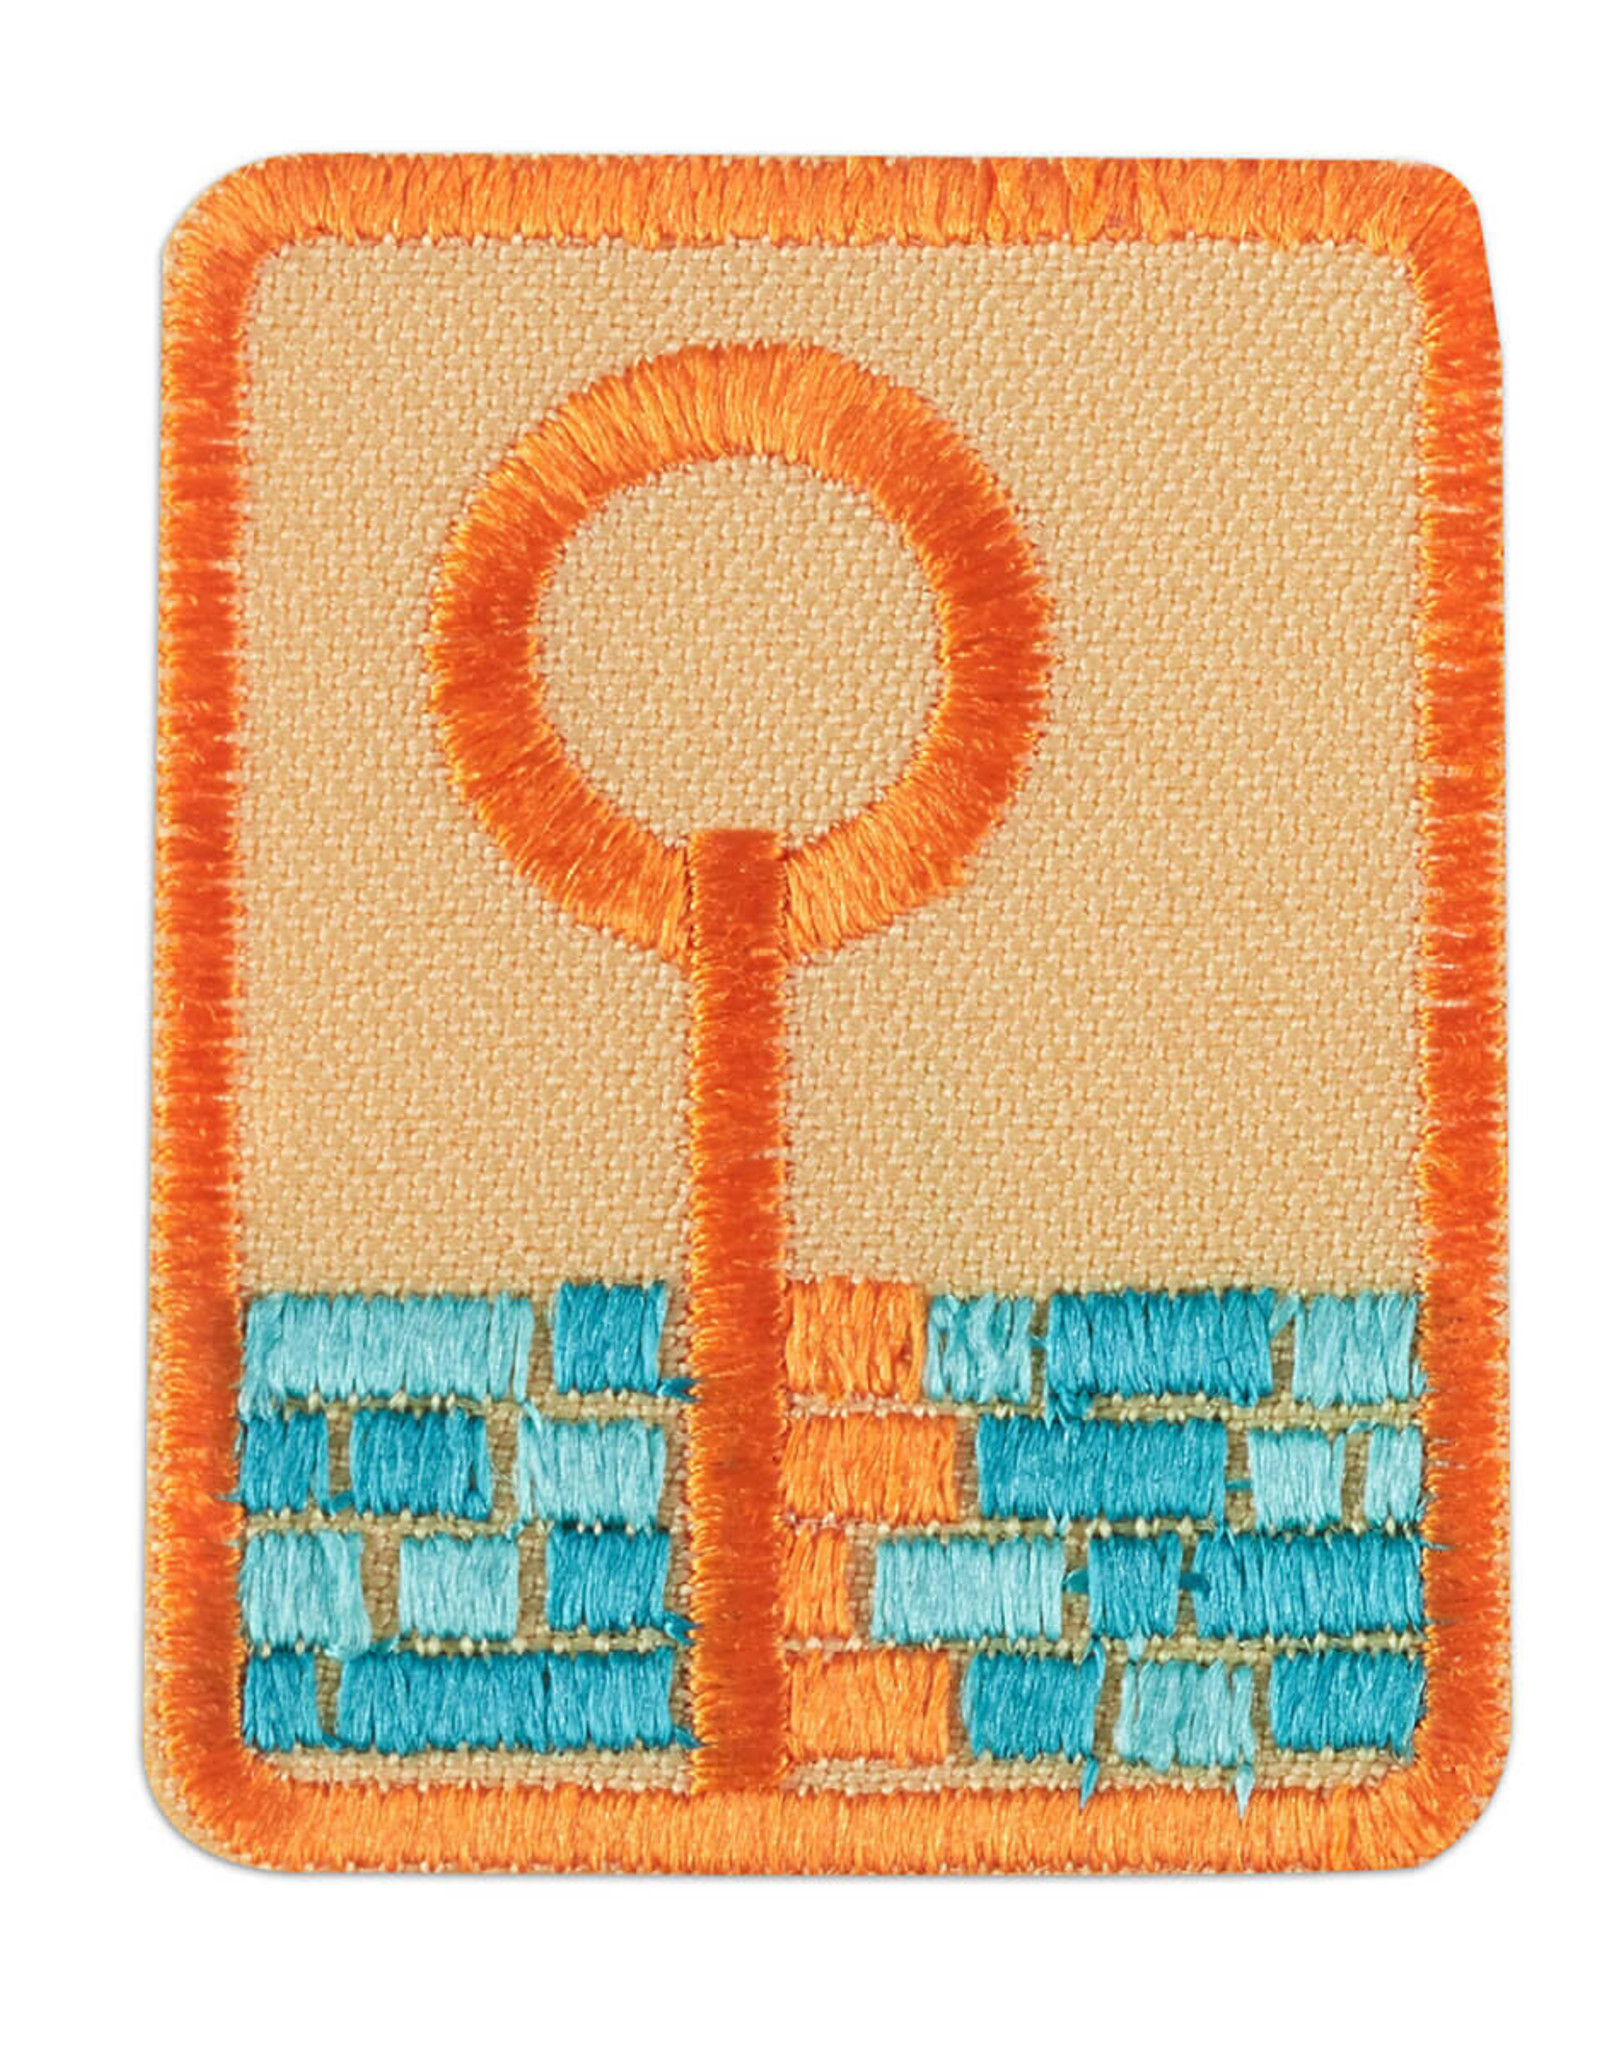 GIRL SCOUTS OF THE USA Senior Cybersecurity Safeguards 2 Badge